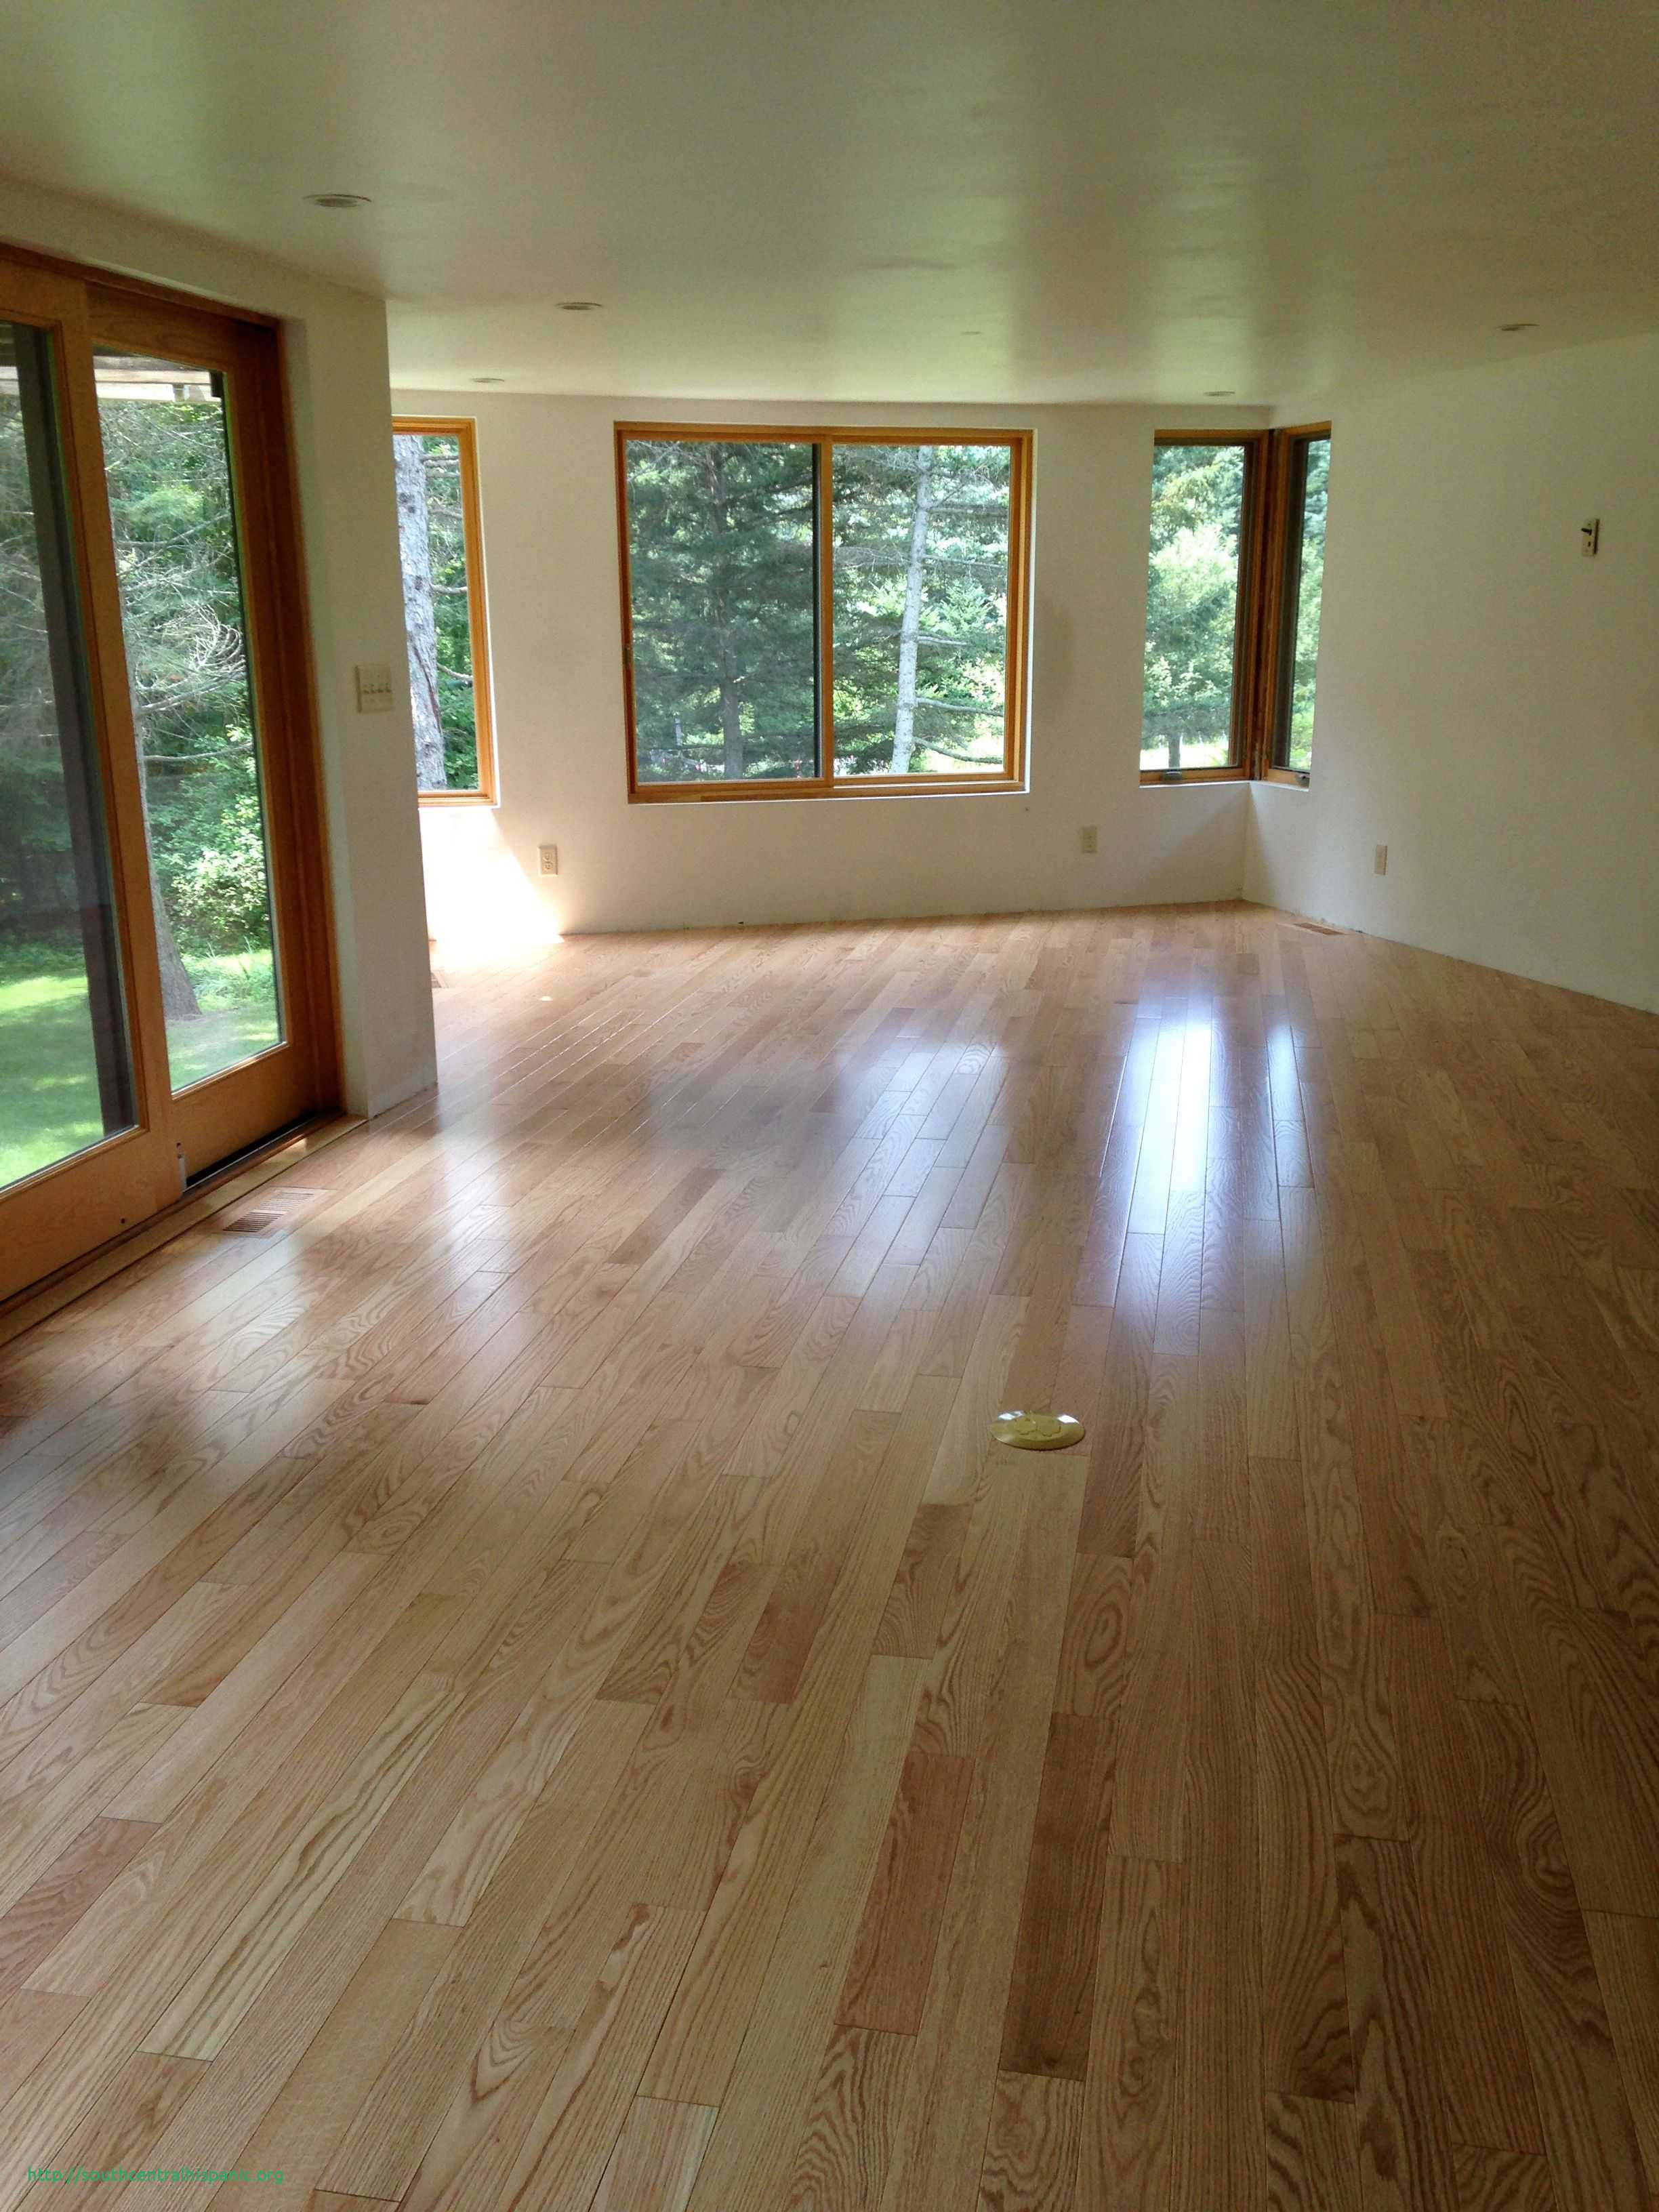 25 attractive Refinishing Red Oak Hardwood Floors 2022 free download refinishing red oak hardwood floors of 4 inch red oak flooring beau engaging discount hardwood flooring 5 within 4 inch red oak flooring luxe great methods to use for refinishing hardwood fl